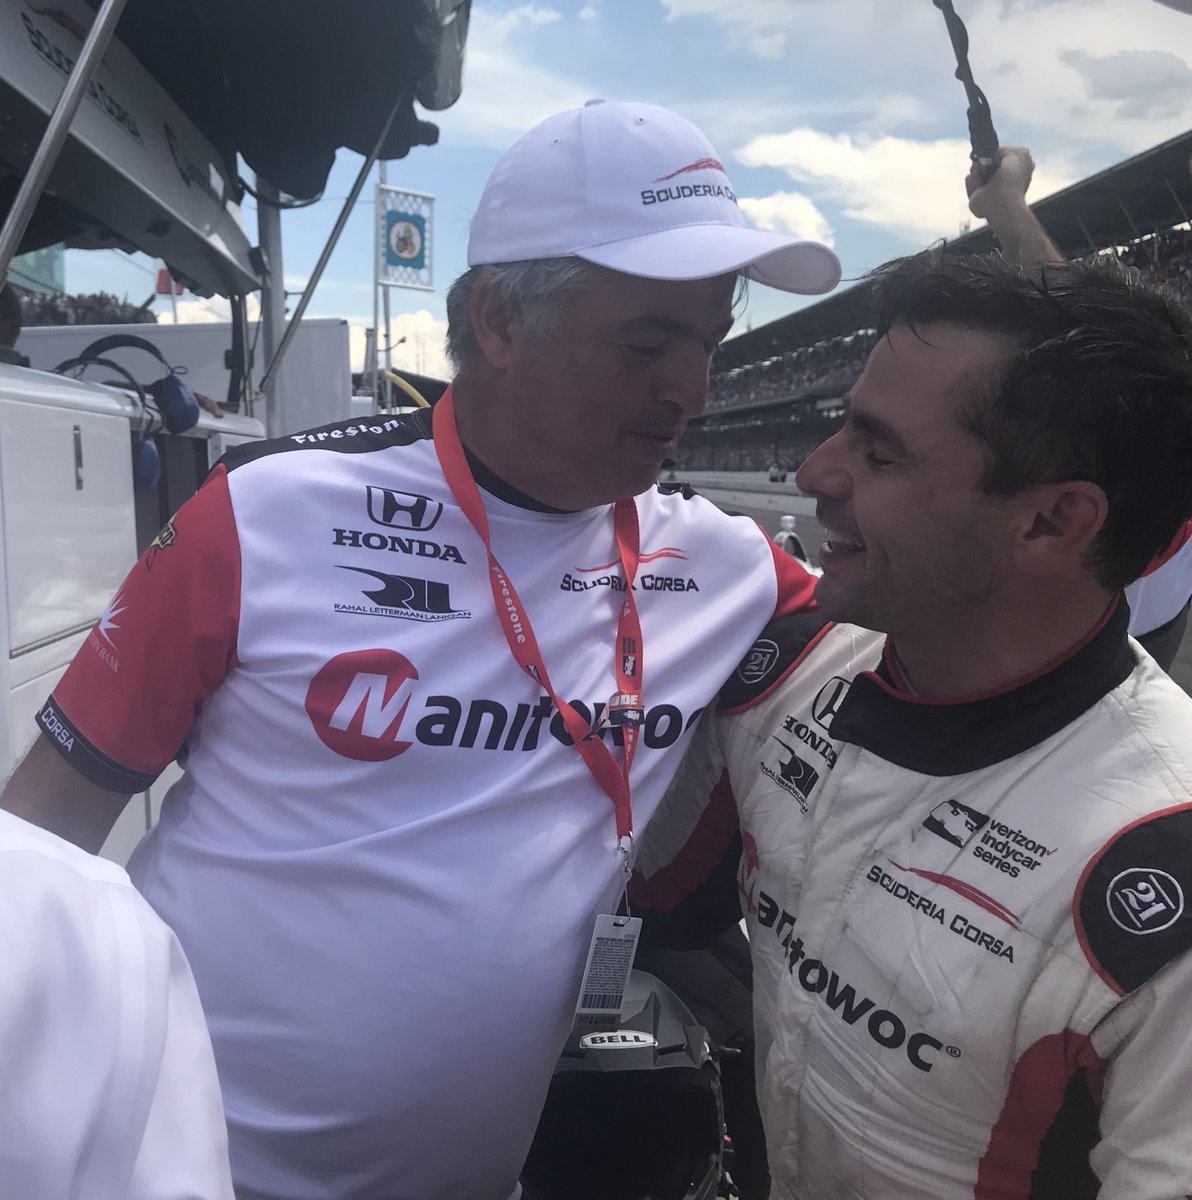 Very proud of @OriolServia and @Scuderia_Corsa great race at the #Indy500